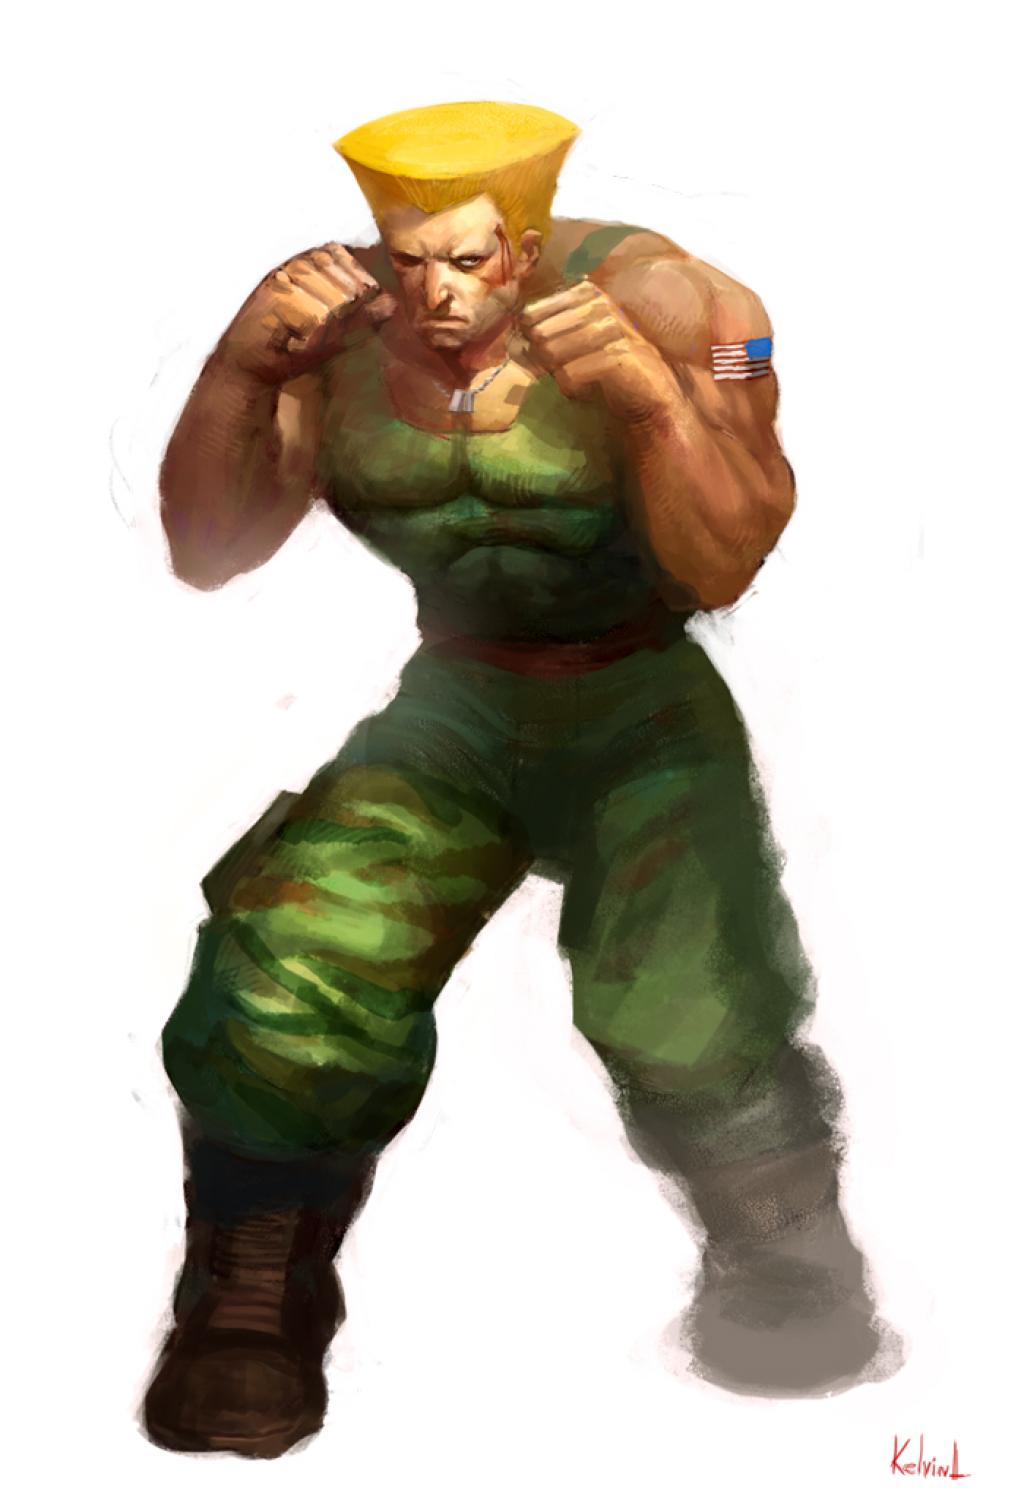 GUile.